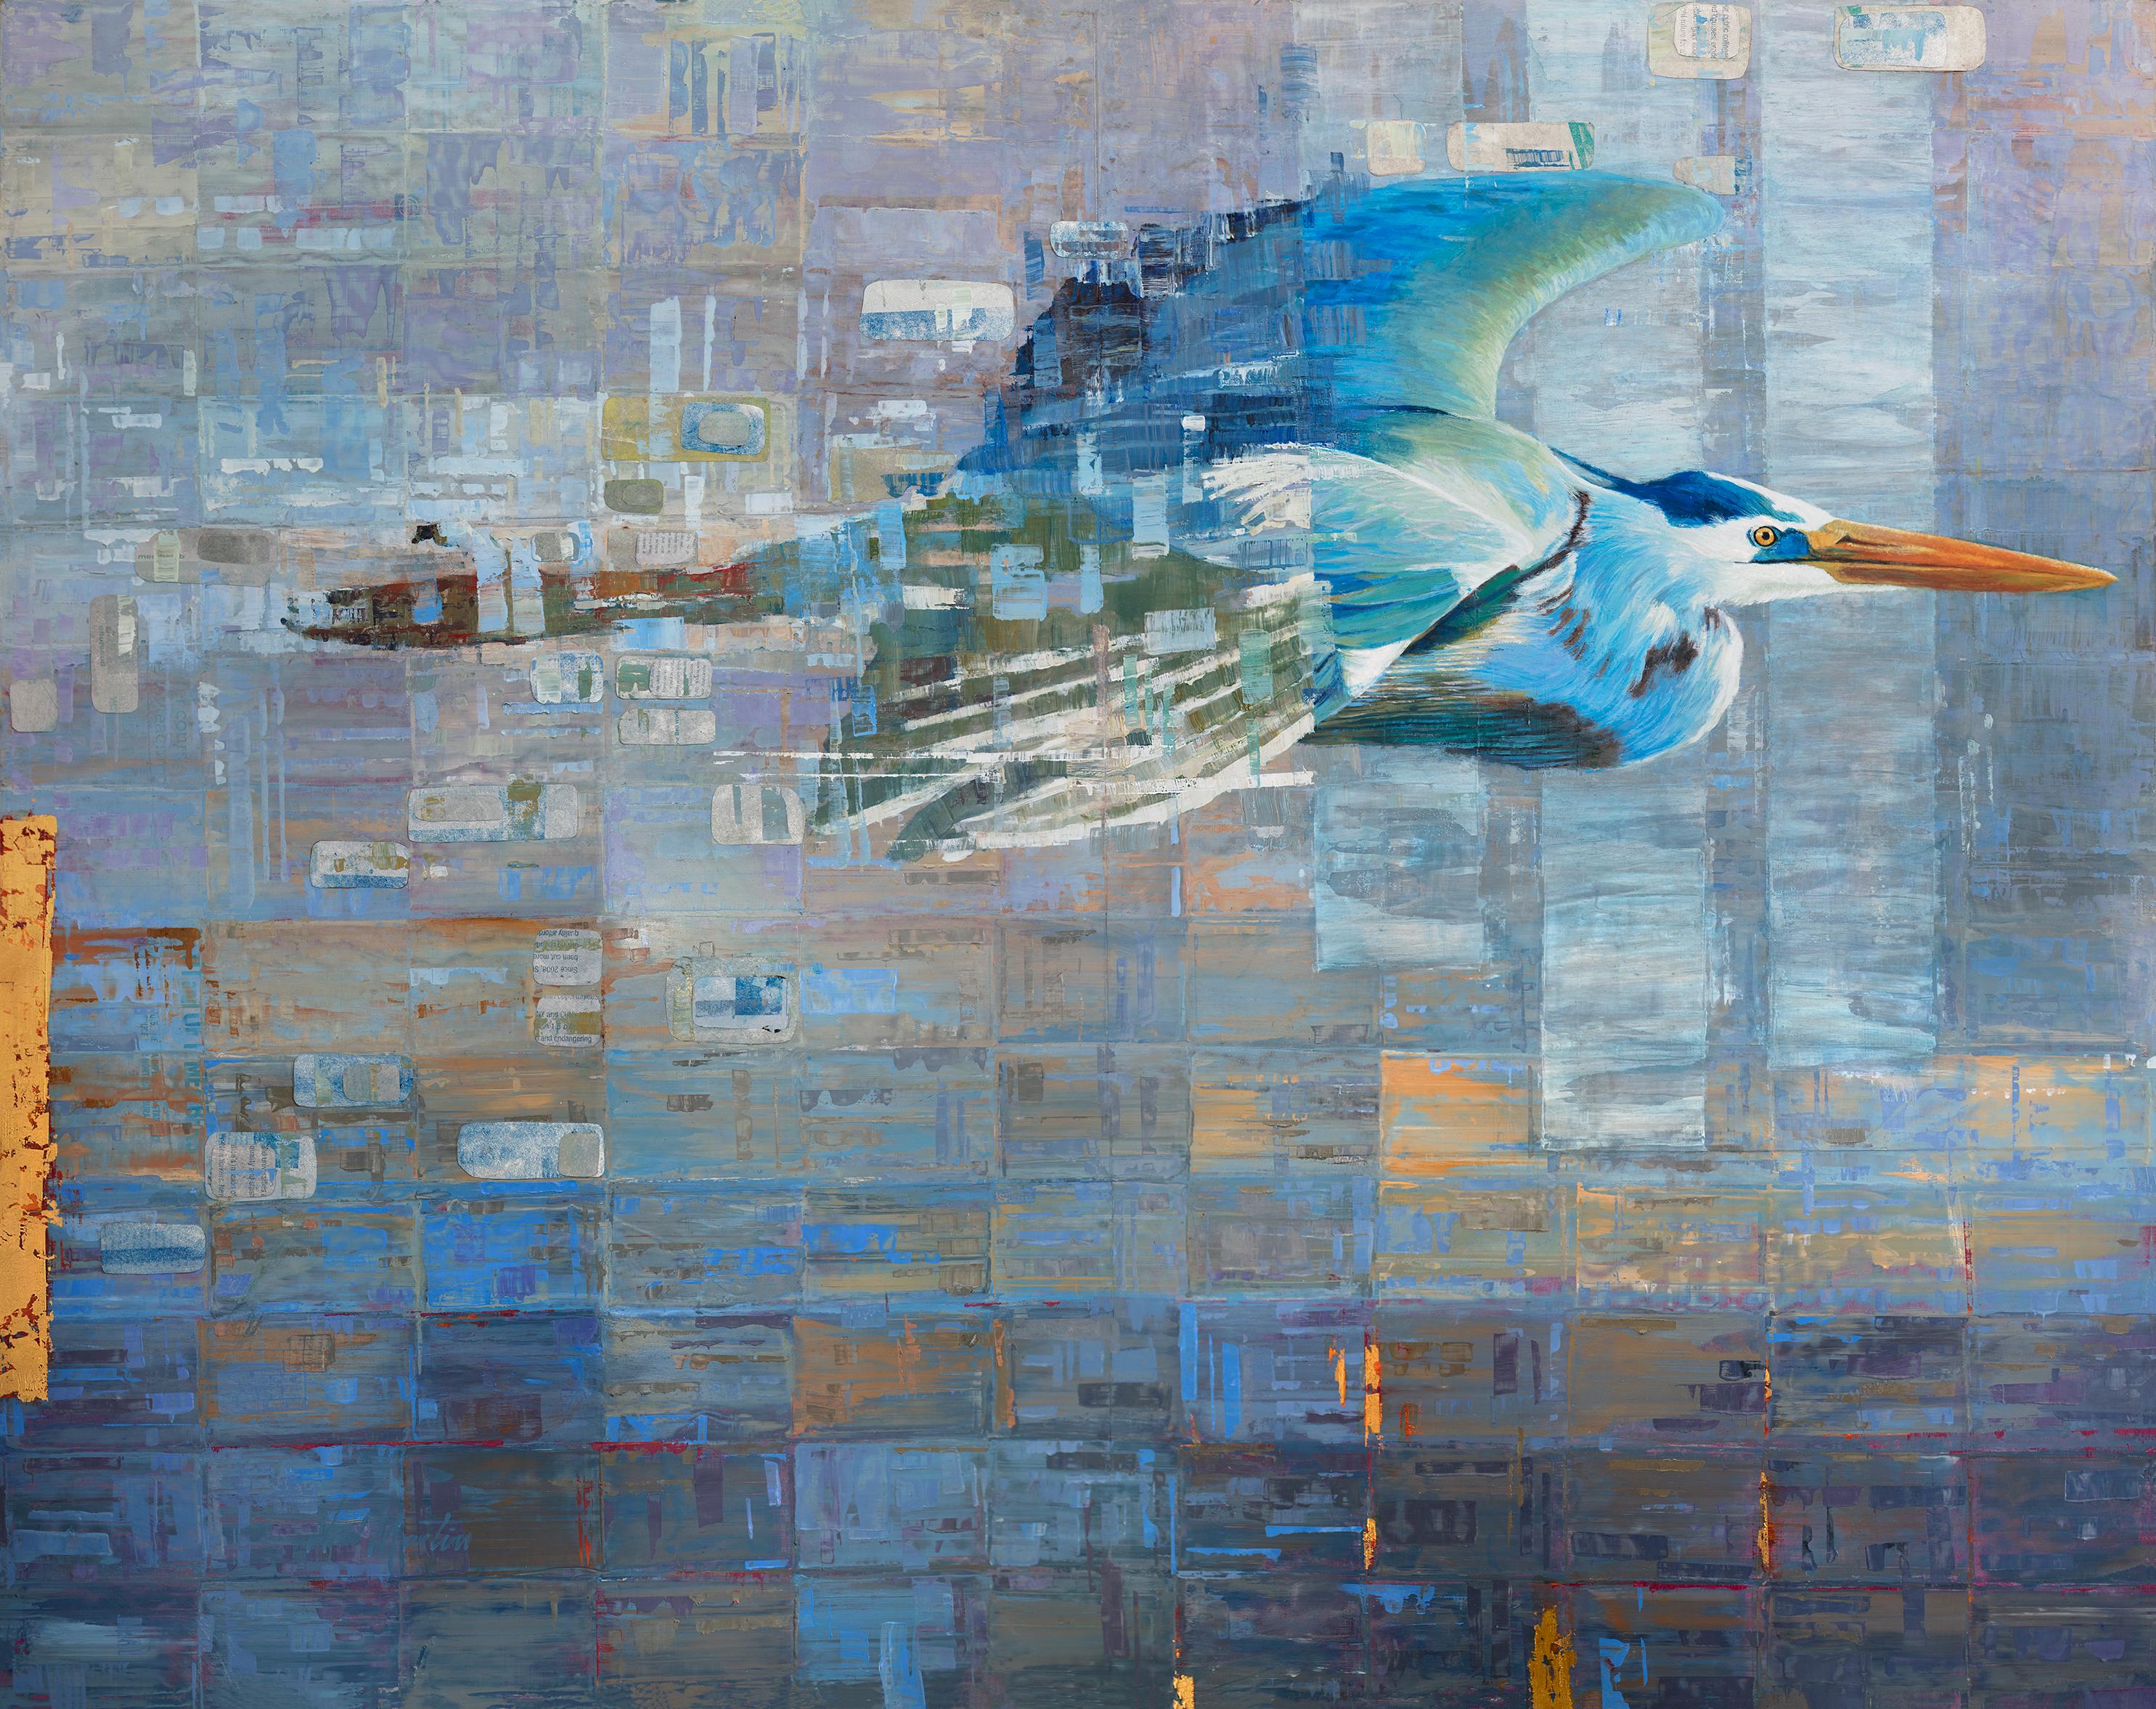 This abstract limited edition print features a blue heron bird in flight (facing left). The background is an abstract rectangular pattern with blue and gold rectangles, which blend into the foreground on the heron's wings, and unifying the